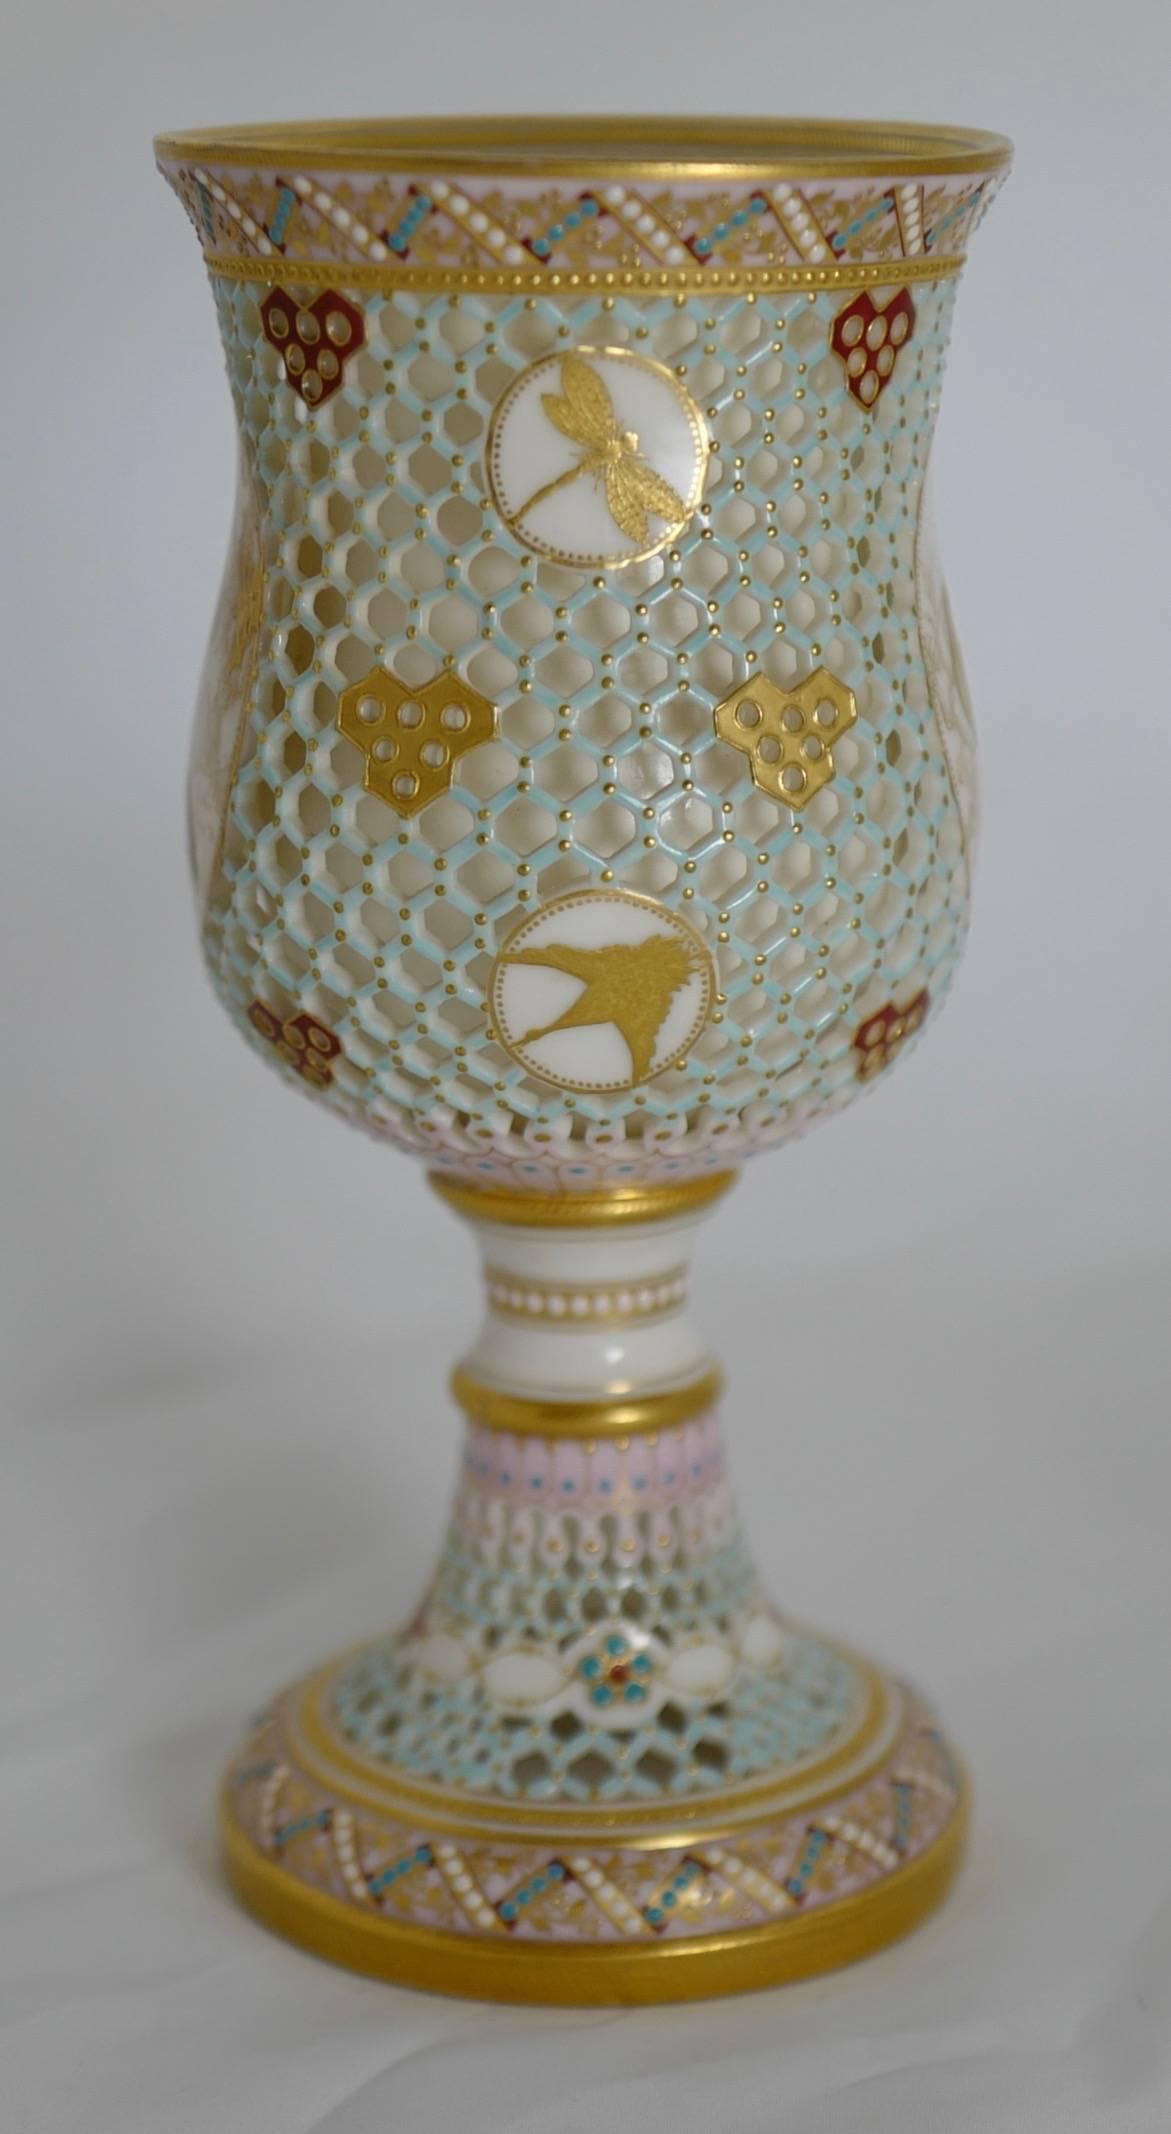 This exquisite goblet, probably by George Owen (also known as the greatest of all reticulators) is designed with an entirely pierced body and stem in a pale-blue honeycomb pattern dotted with gold between borders of zig-zagging turquoise and white